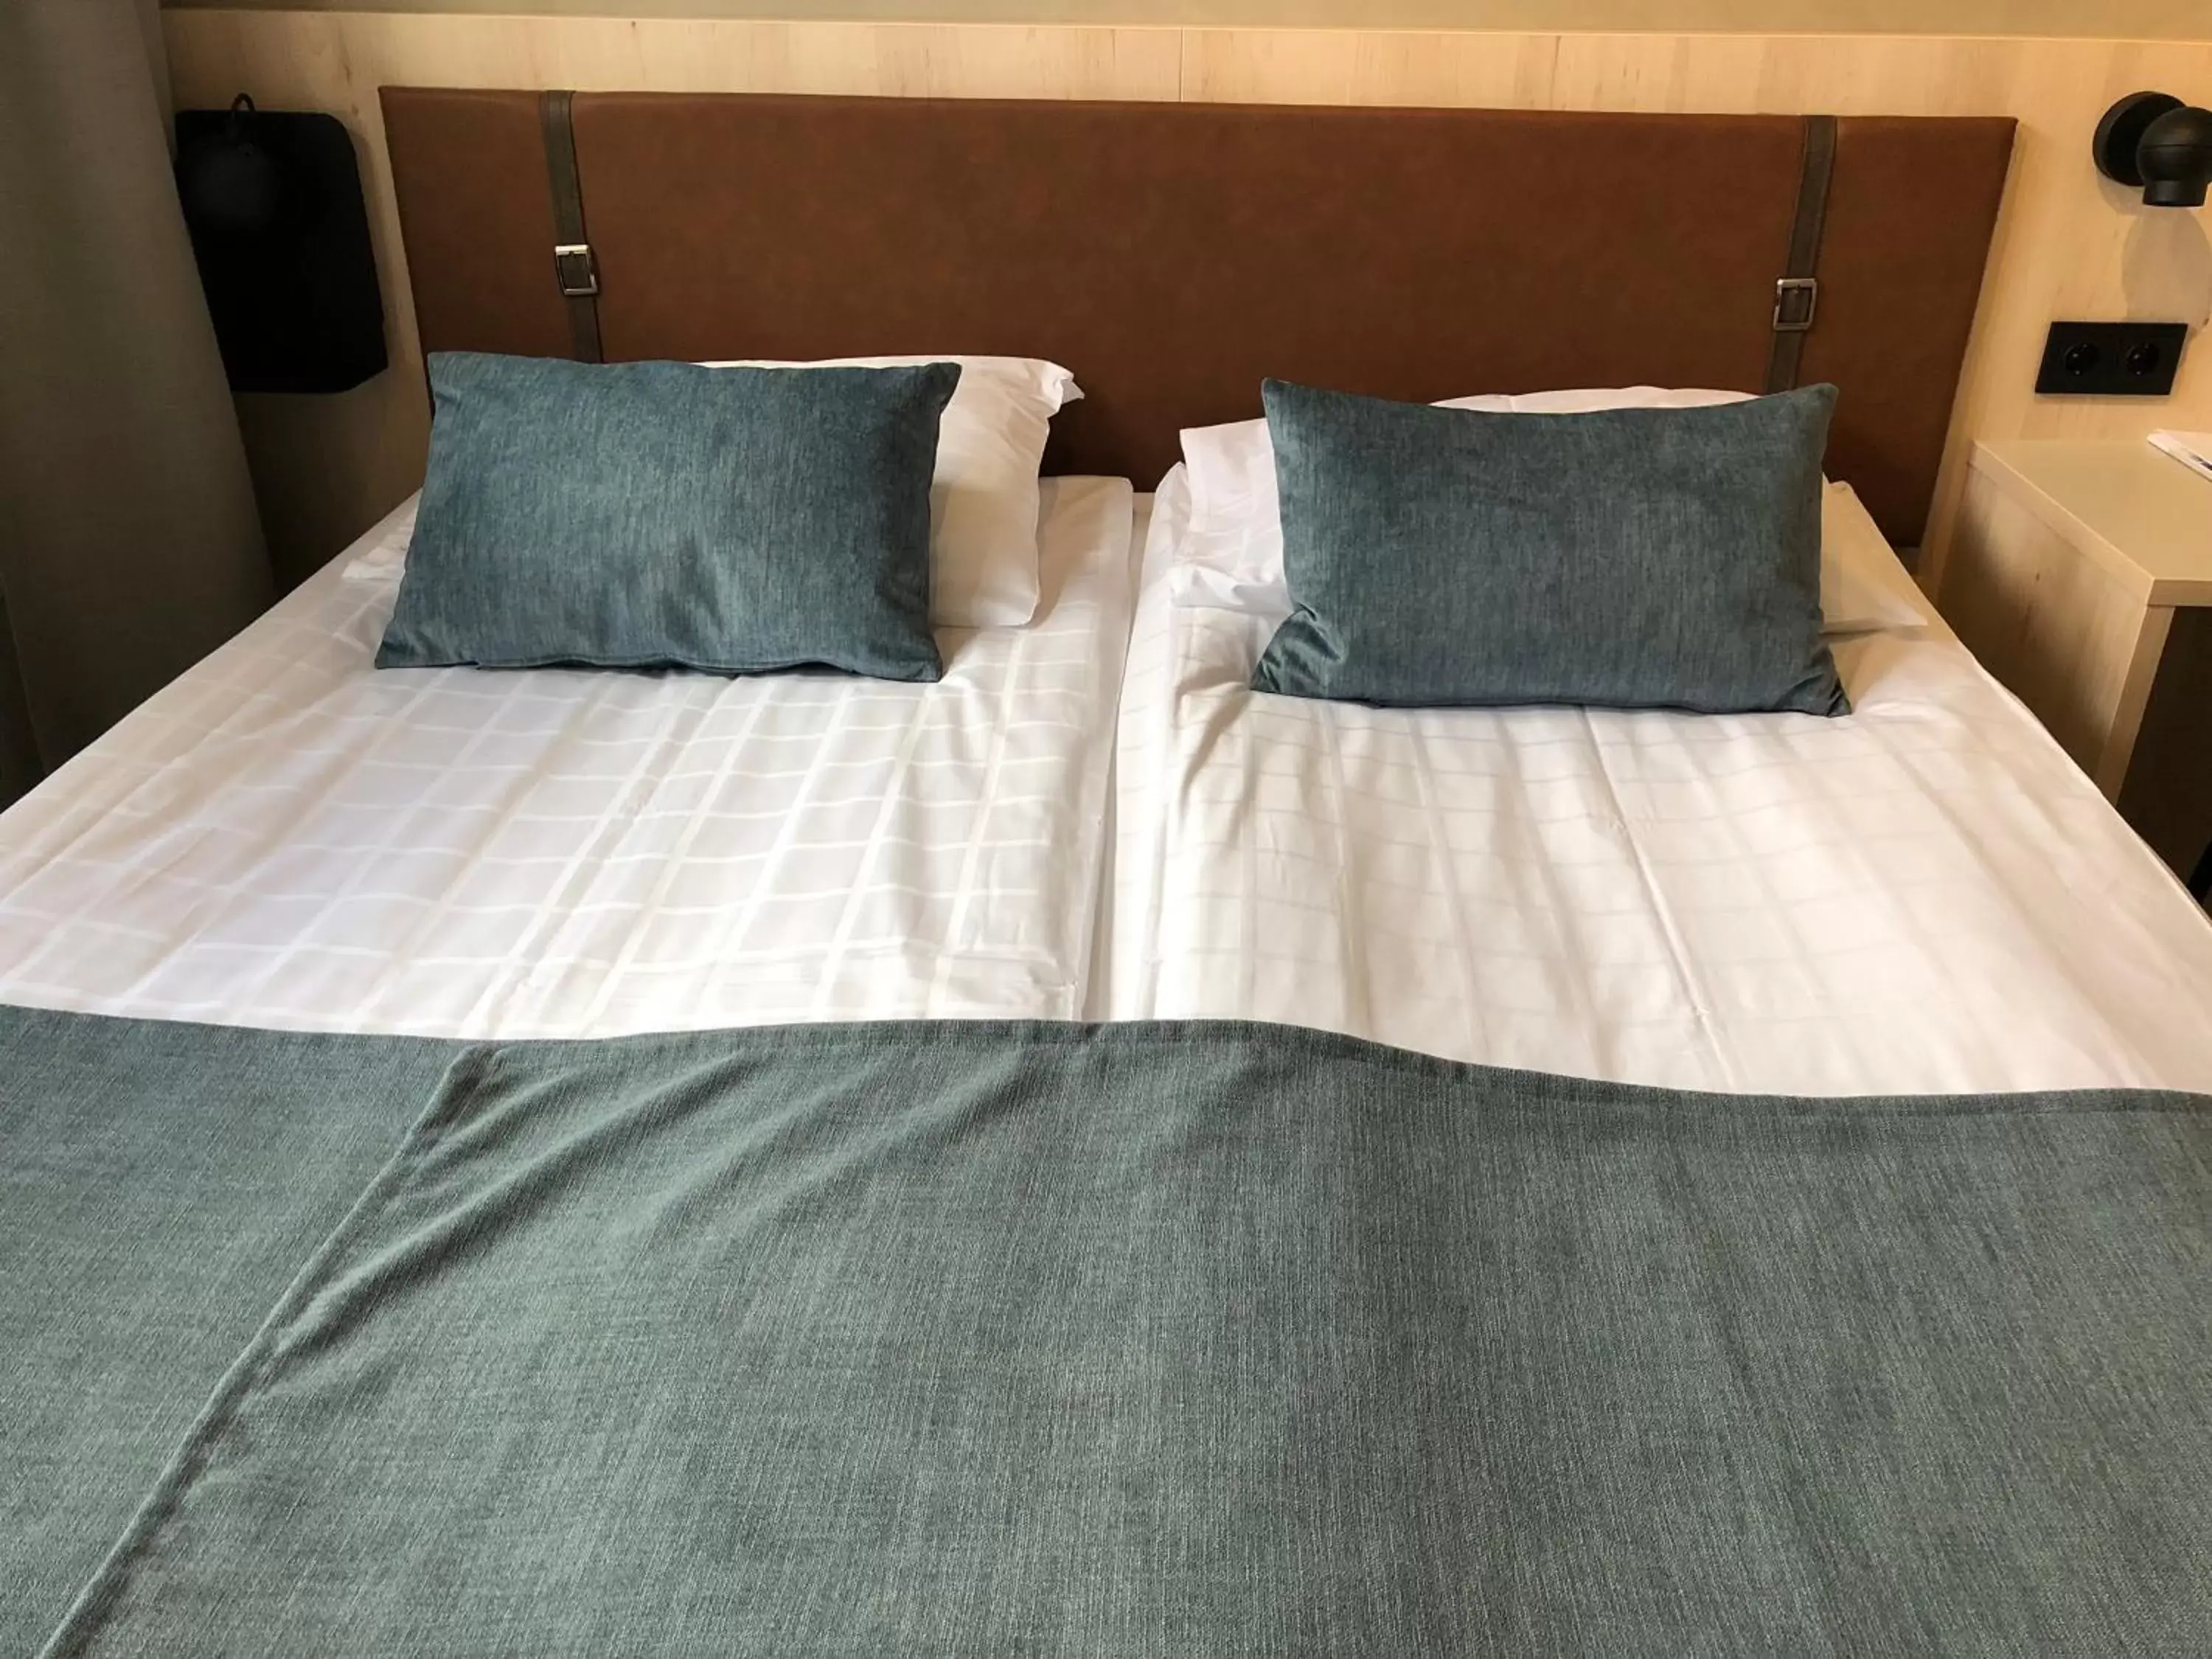 Bed in Pilot Airport Hotel